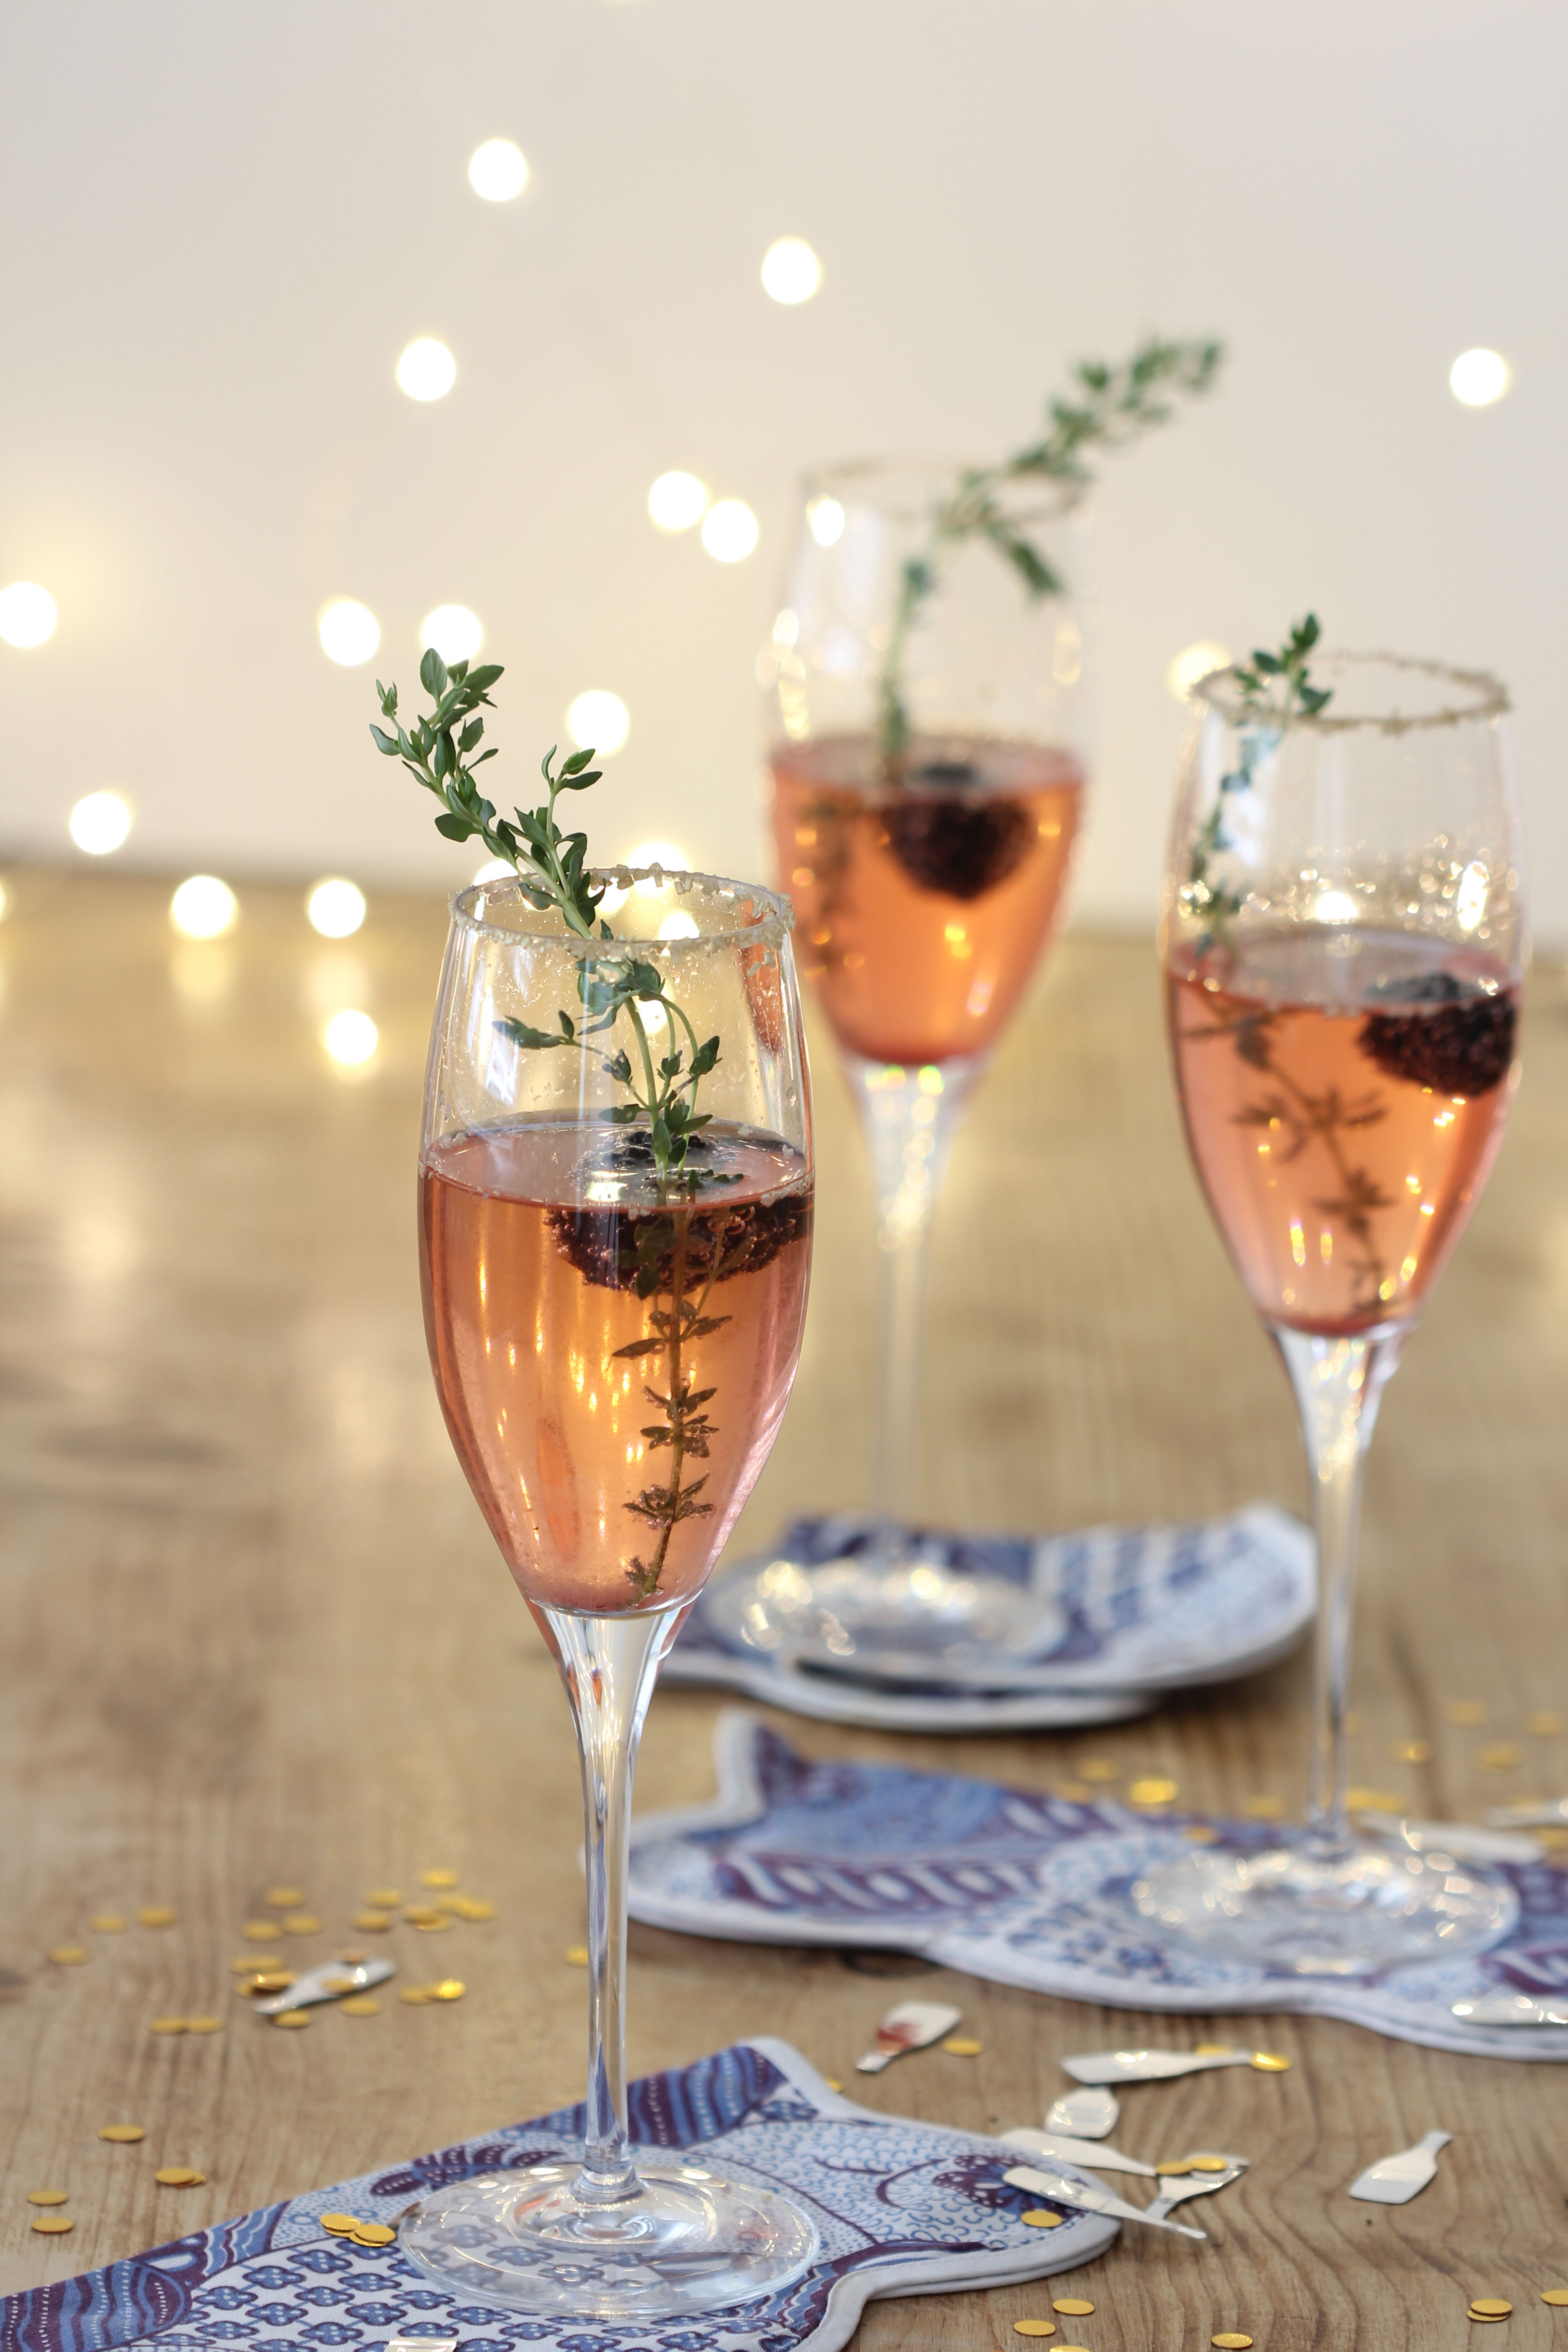 Looking for a fun, festive and delicious Cocktail for the Holidays? This Blackberry Thyme Champagne Cocktail is always a hit!